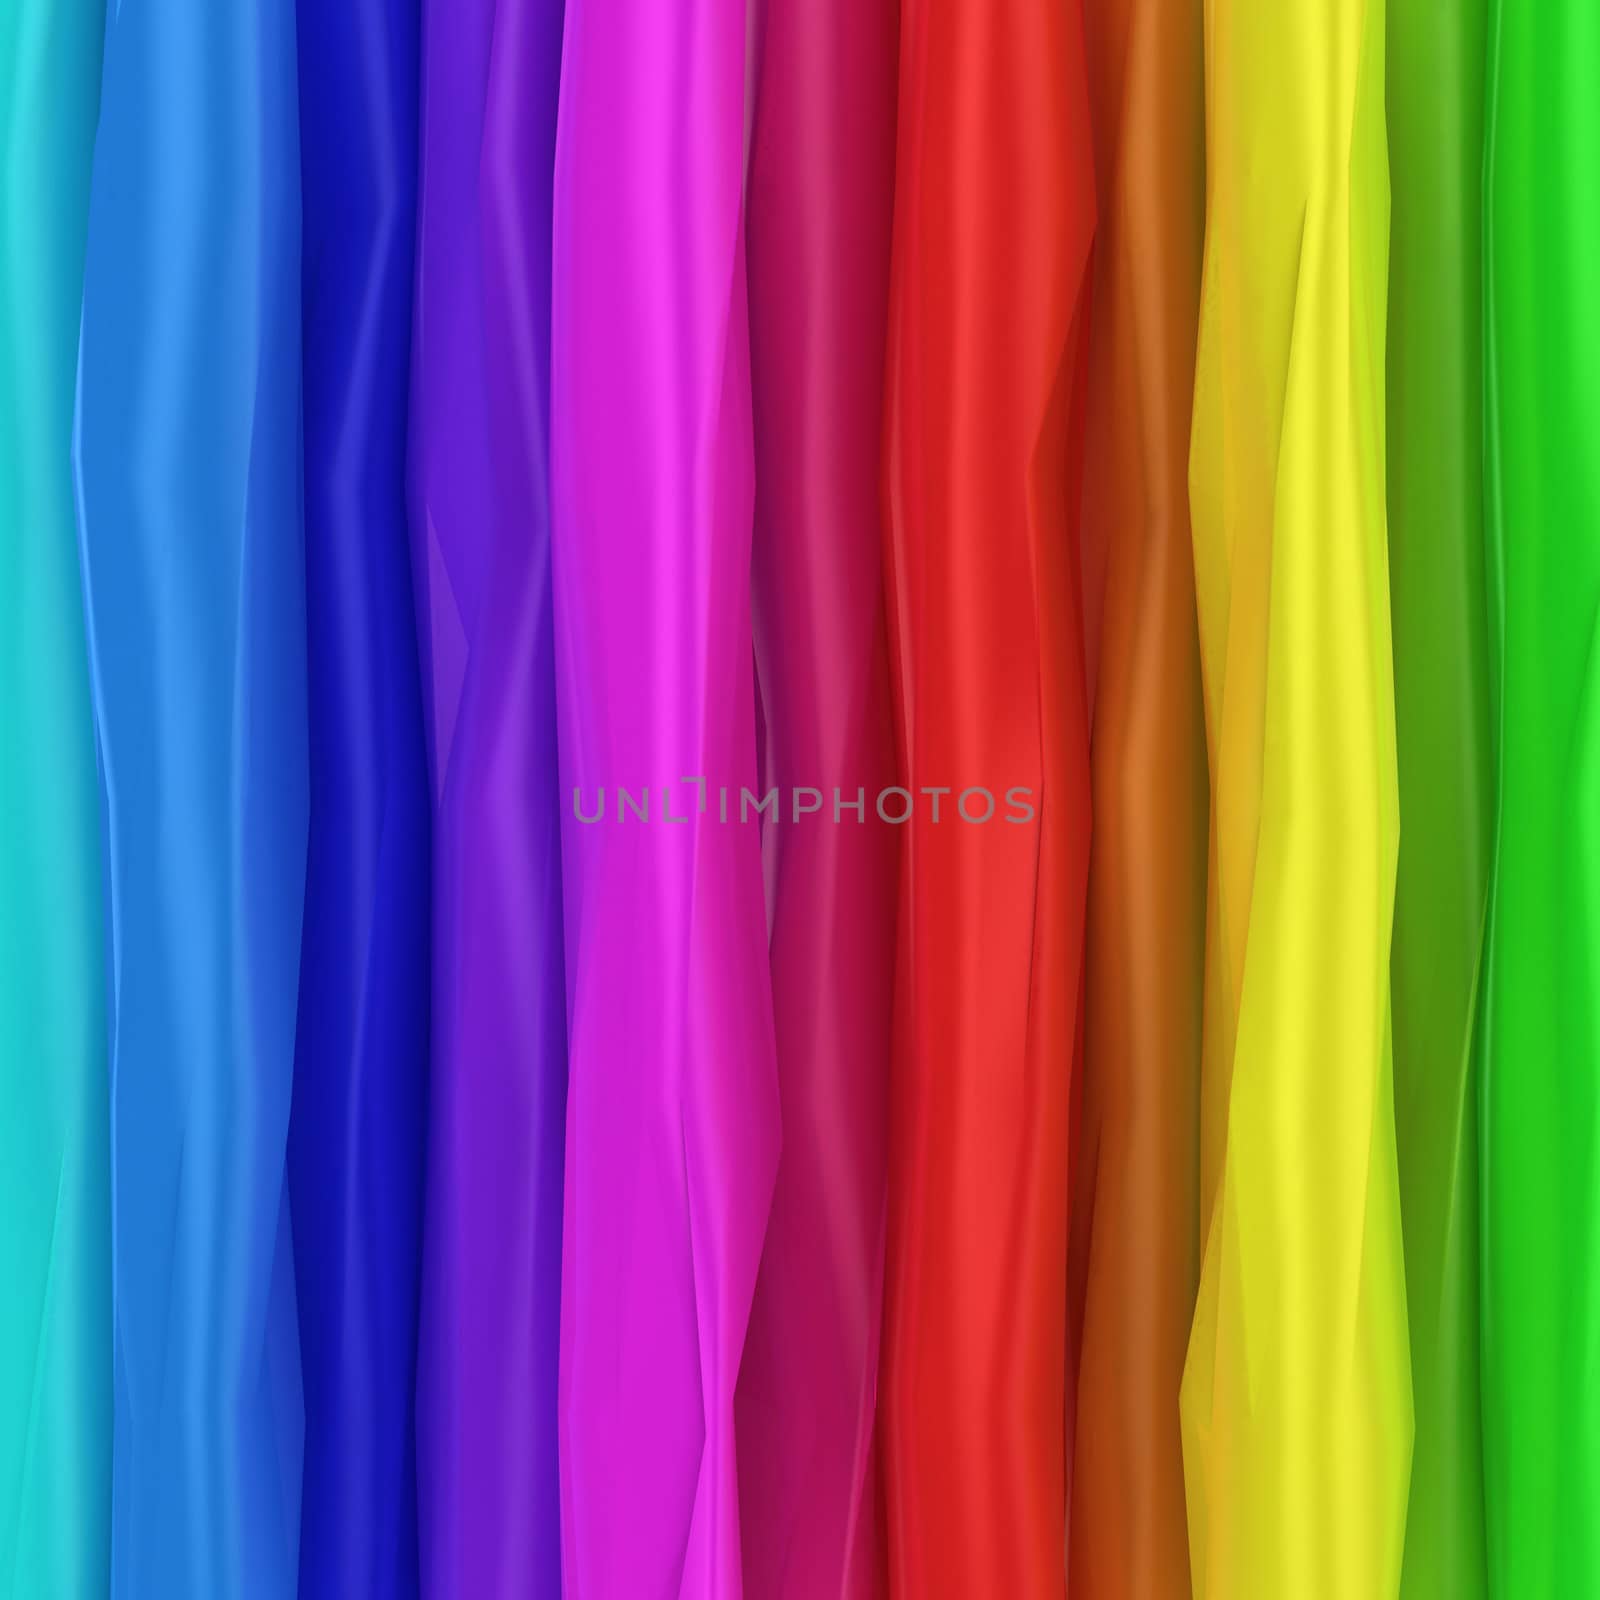 Wrinkled background of rainbow colors